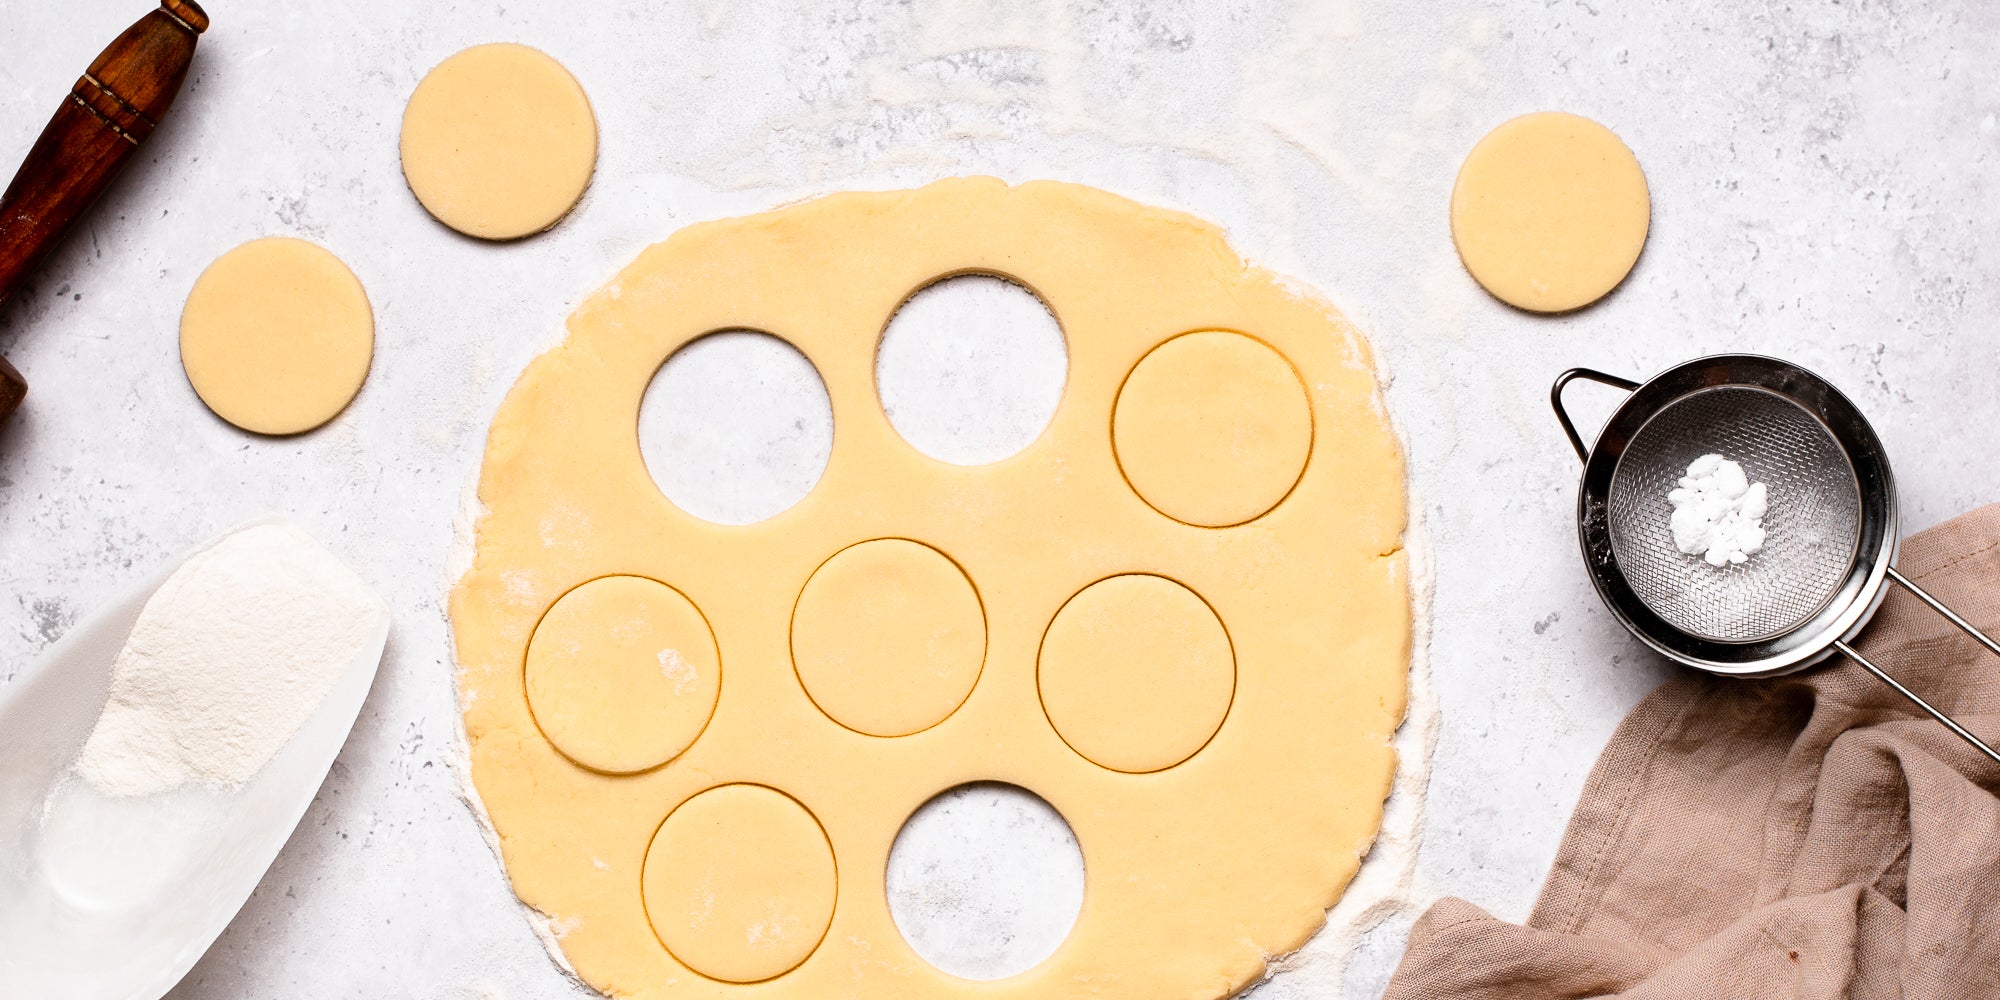 Top down view of vegan shortbread cut out with a circle cookie cutter